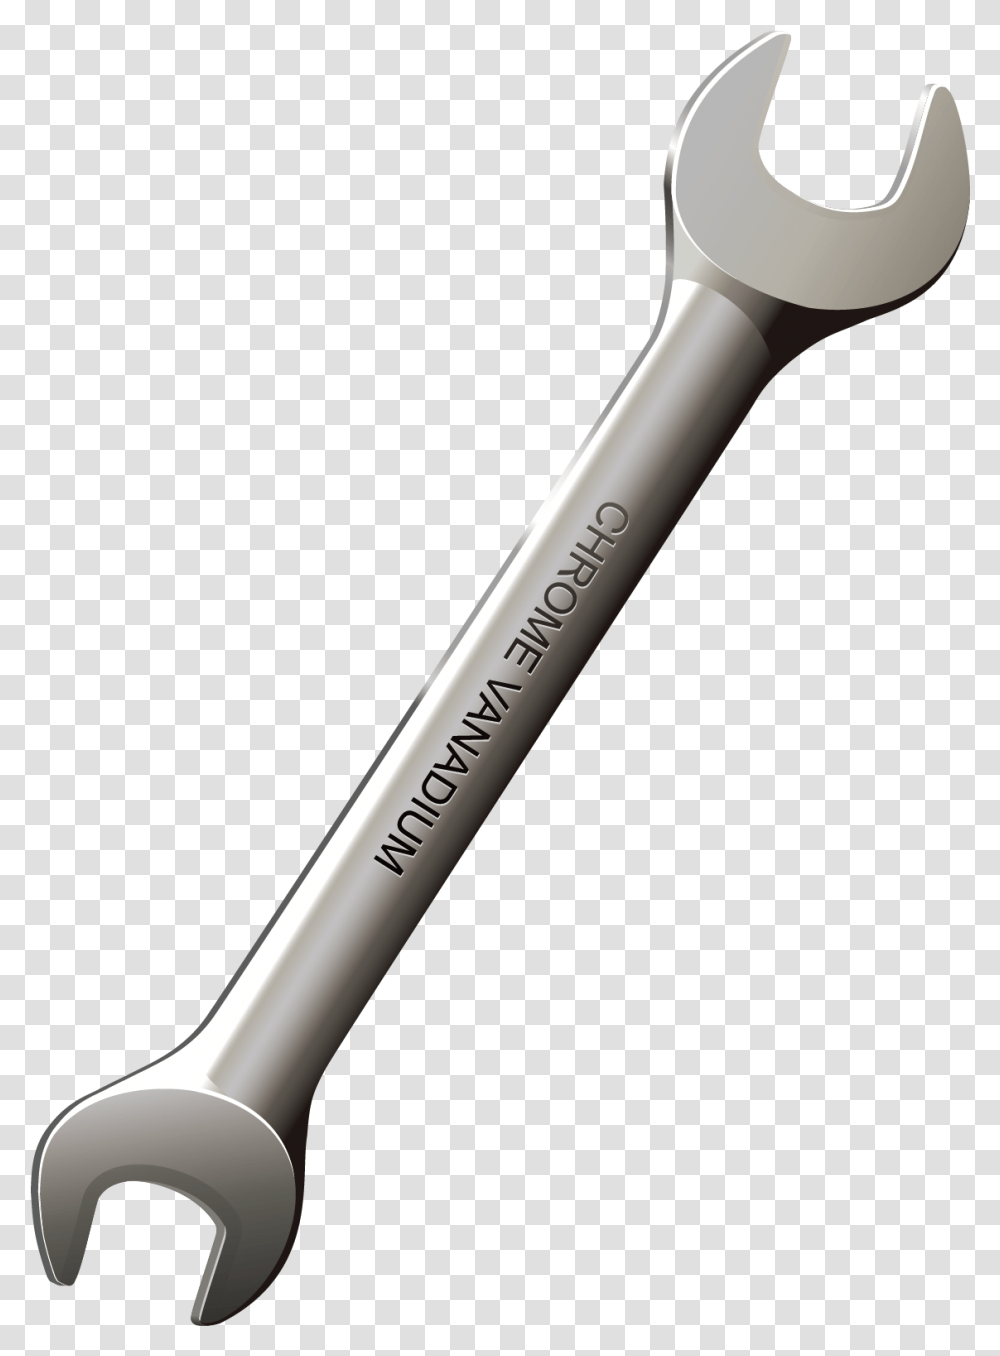 Wrench Adjustable Spanner Tool Key Wrench, Hammer Transparent Png